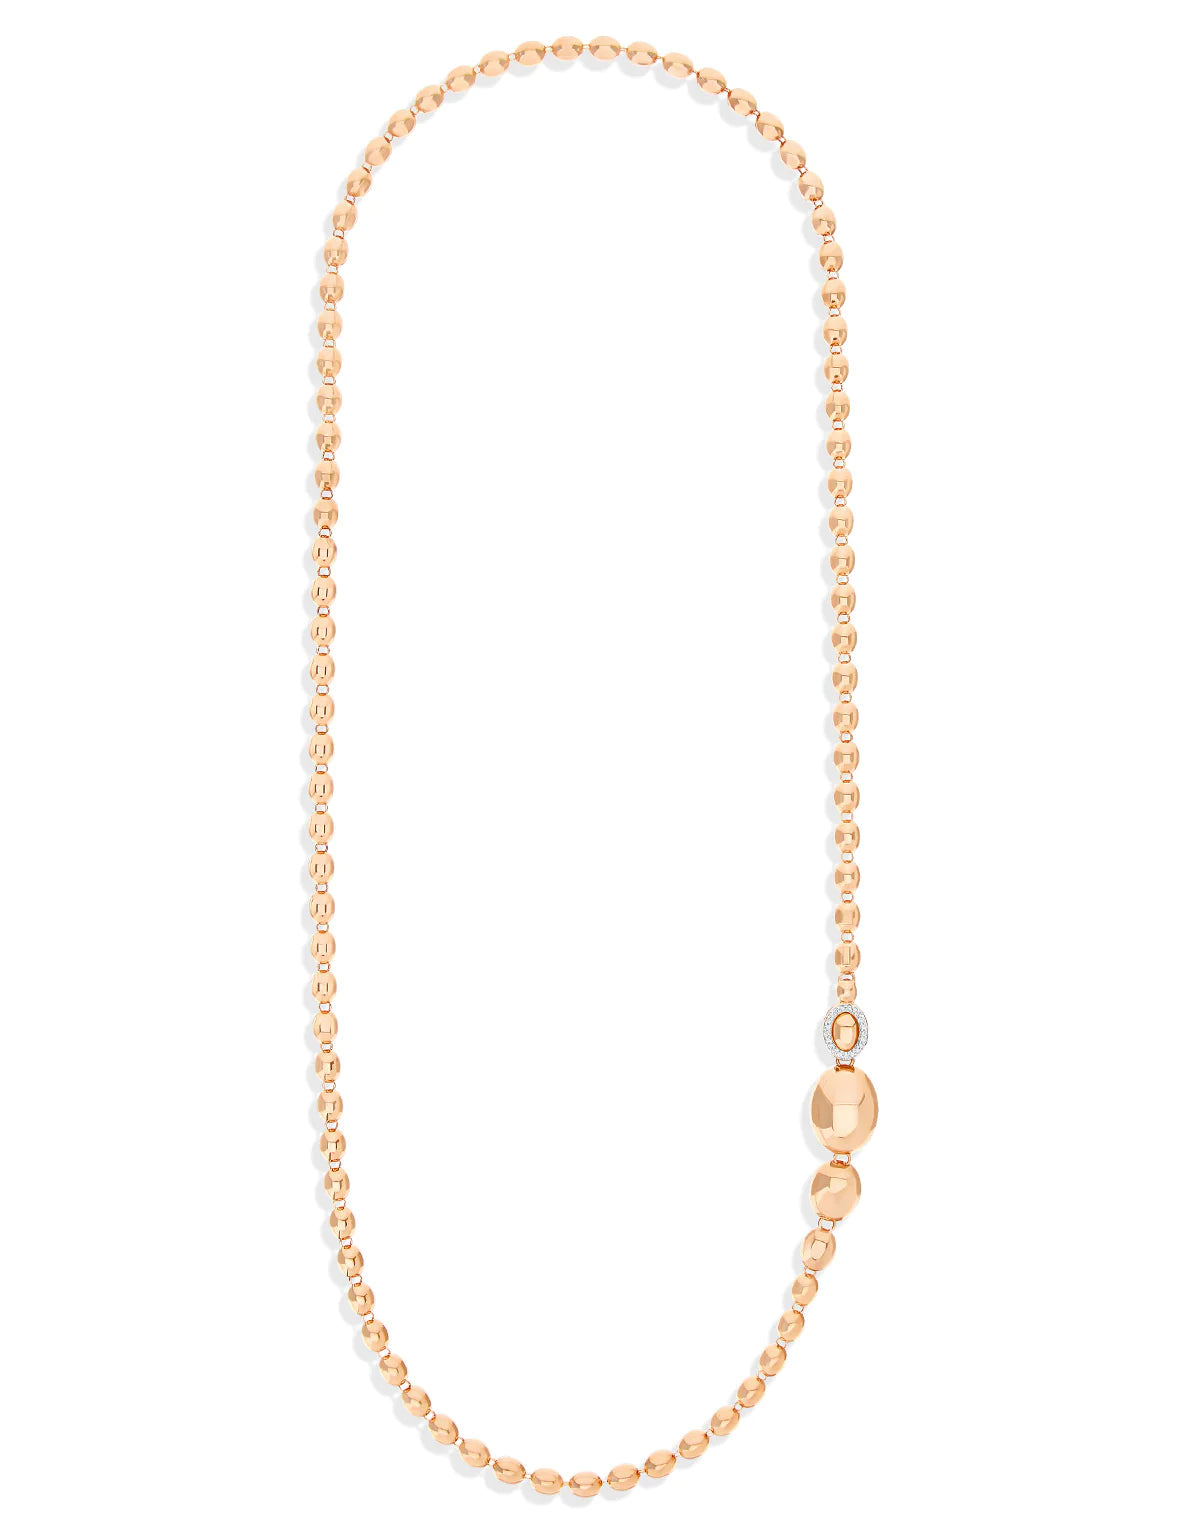 Nanis Ivy Rose Gold Boules and Diamonds Iconic Convertible Necklace - Orsini Jewellers